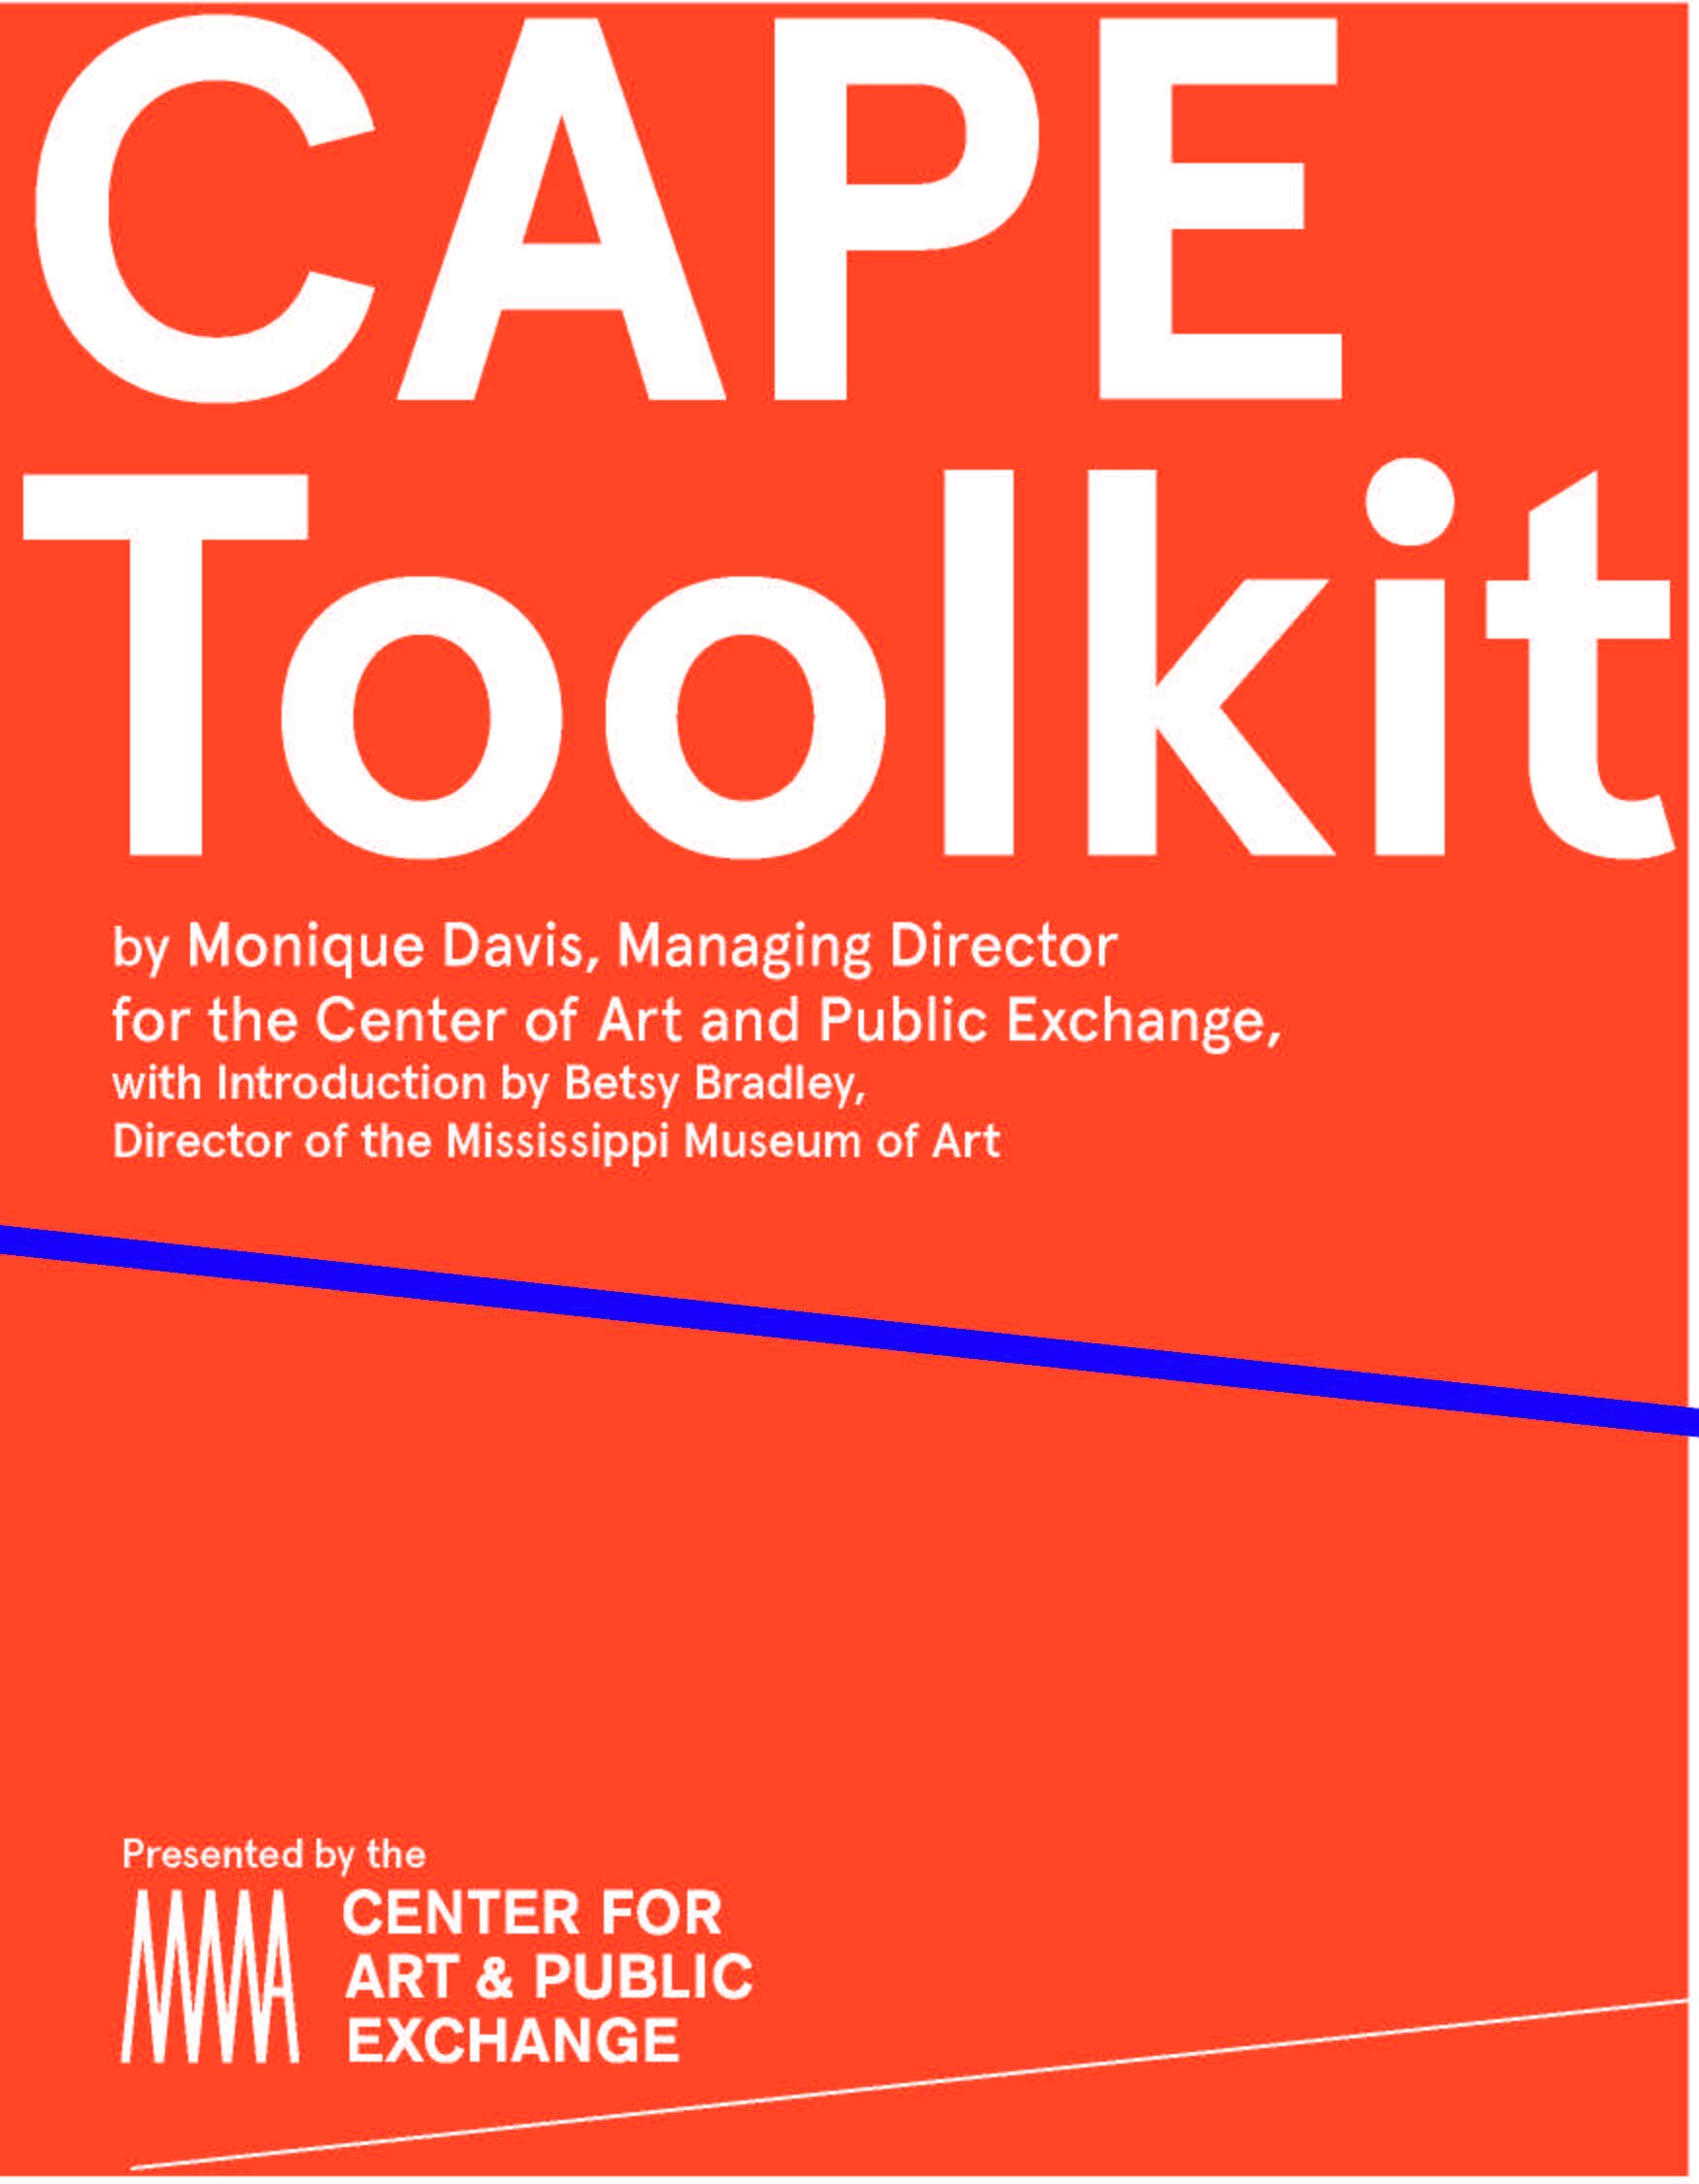 2021 CAPE Toolkit-FINAL-Oct2021(1)_Page_01.jpg